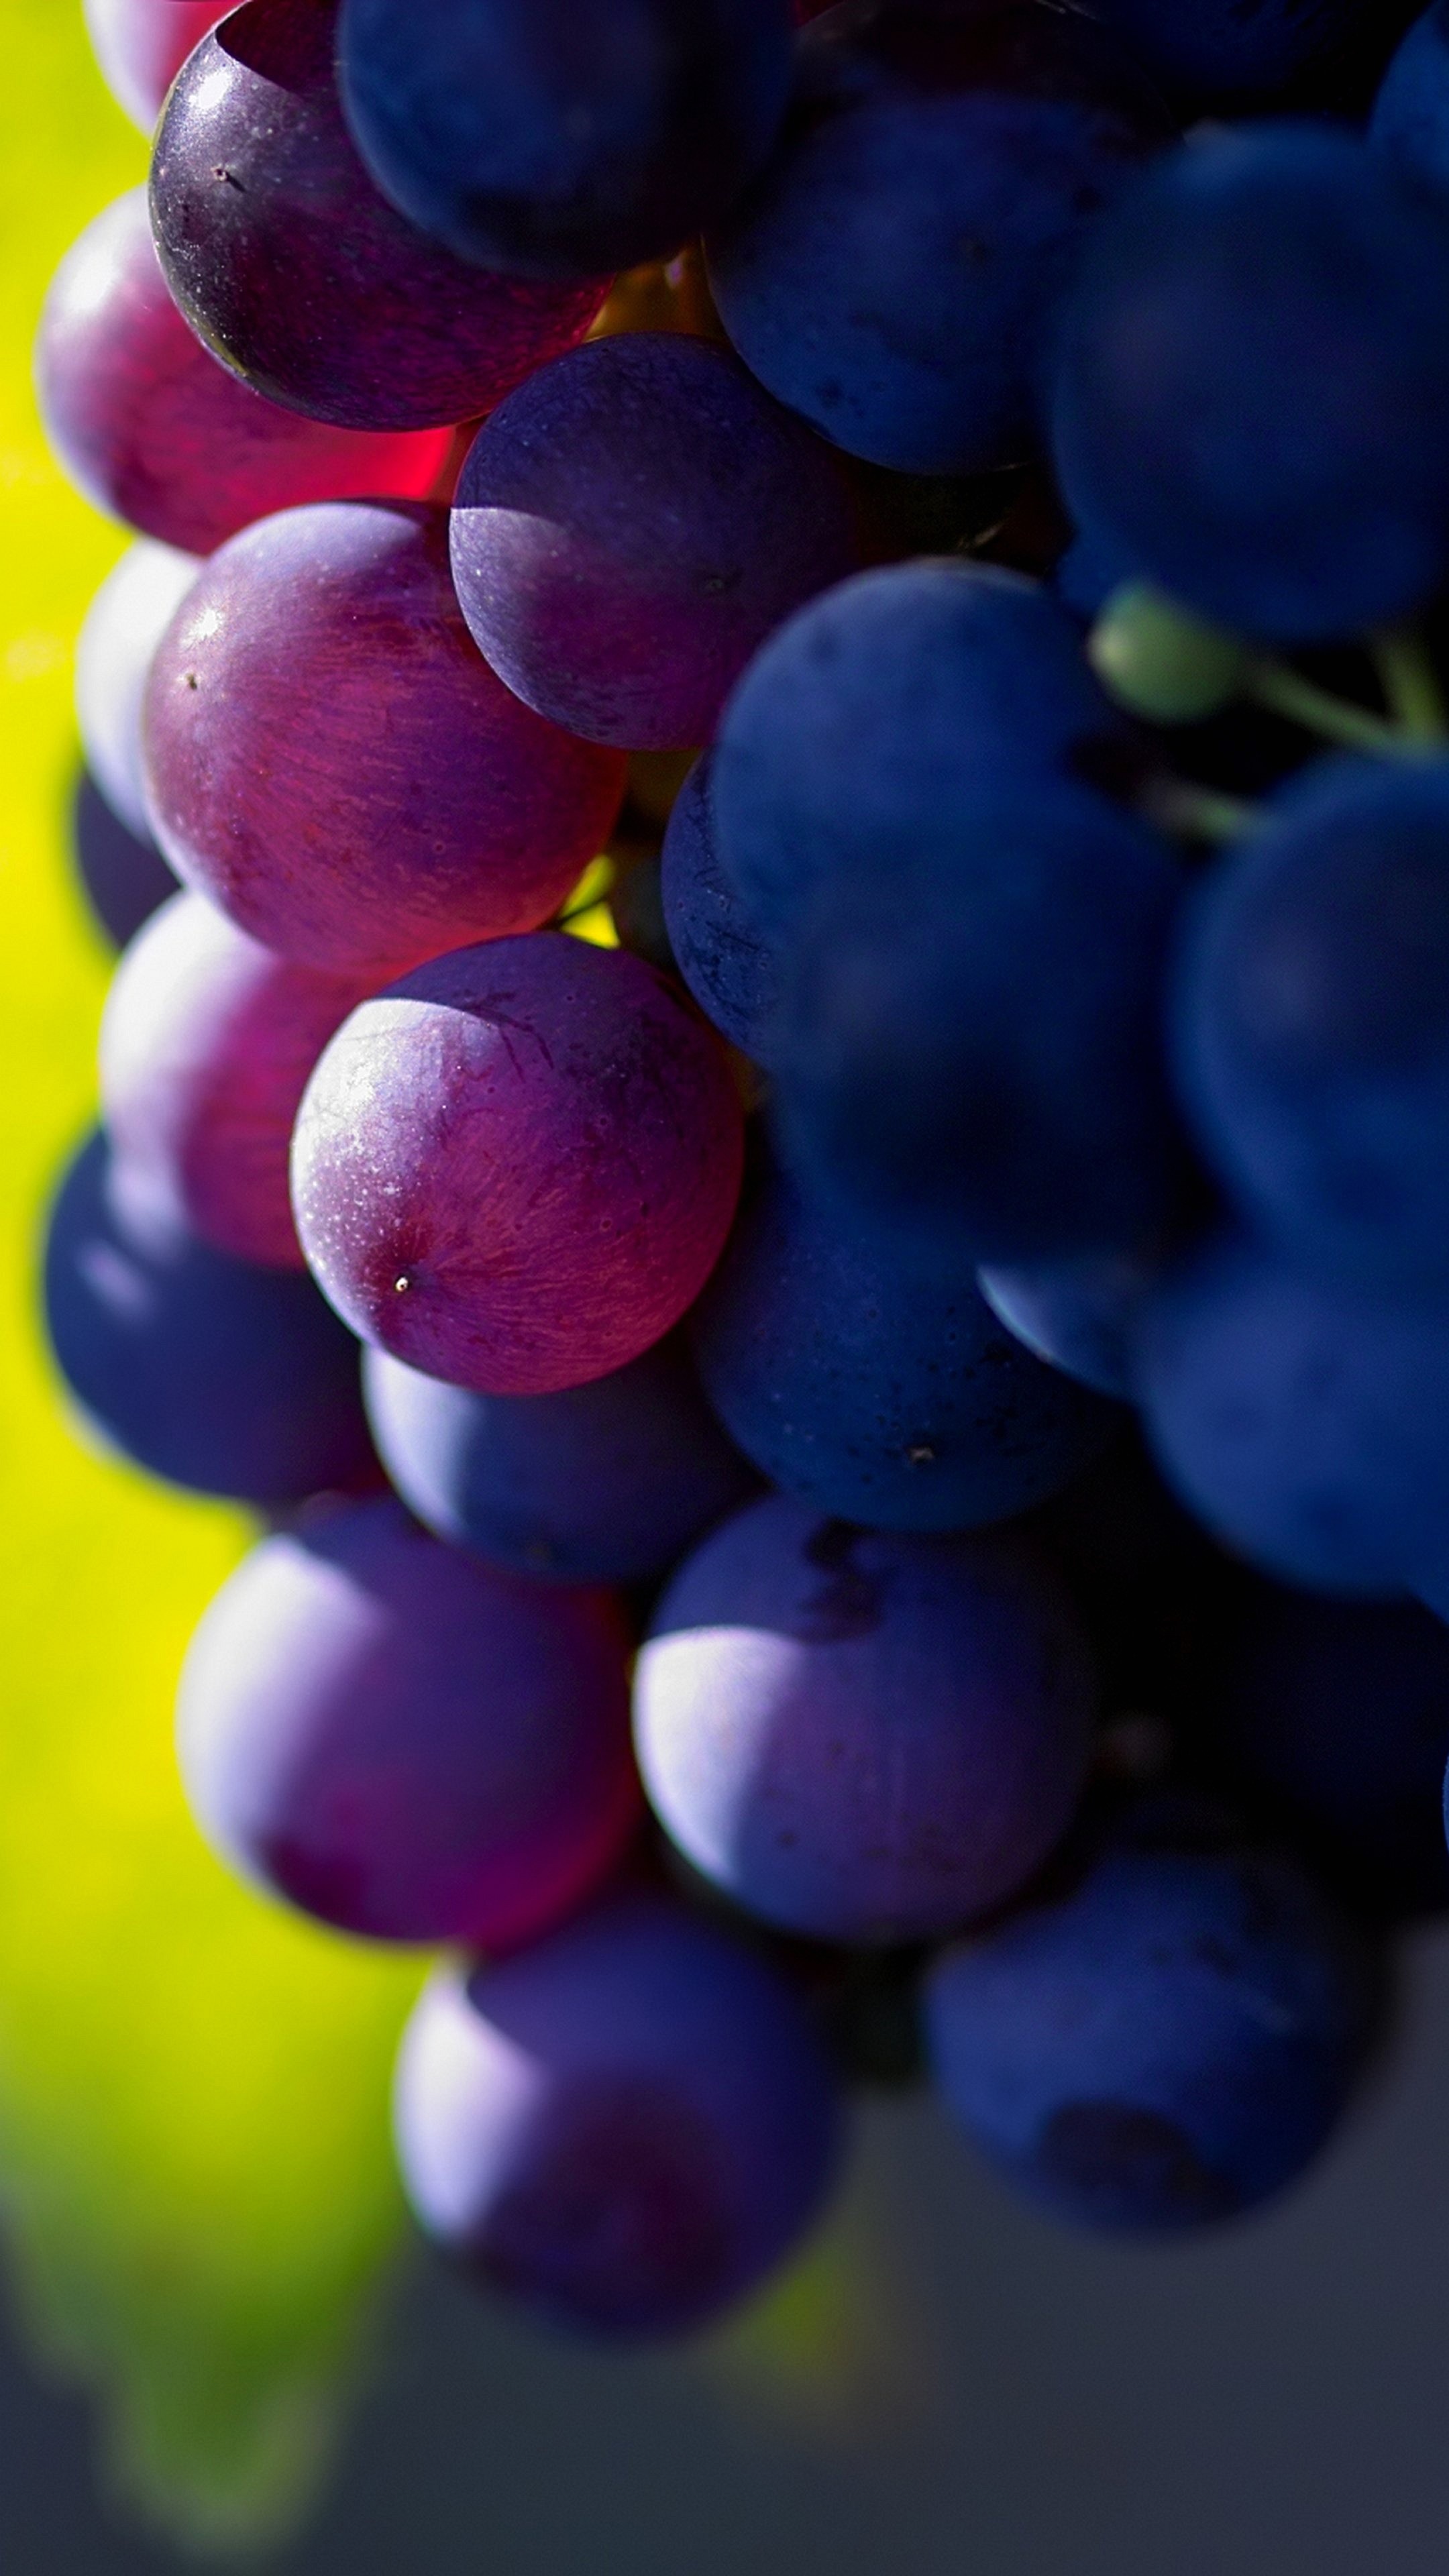 Grapes: Classified as either table or wine species. 2160x3840 4K Wallpaper.